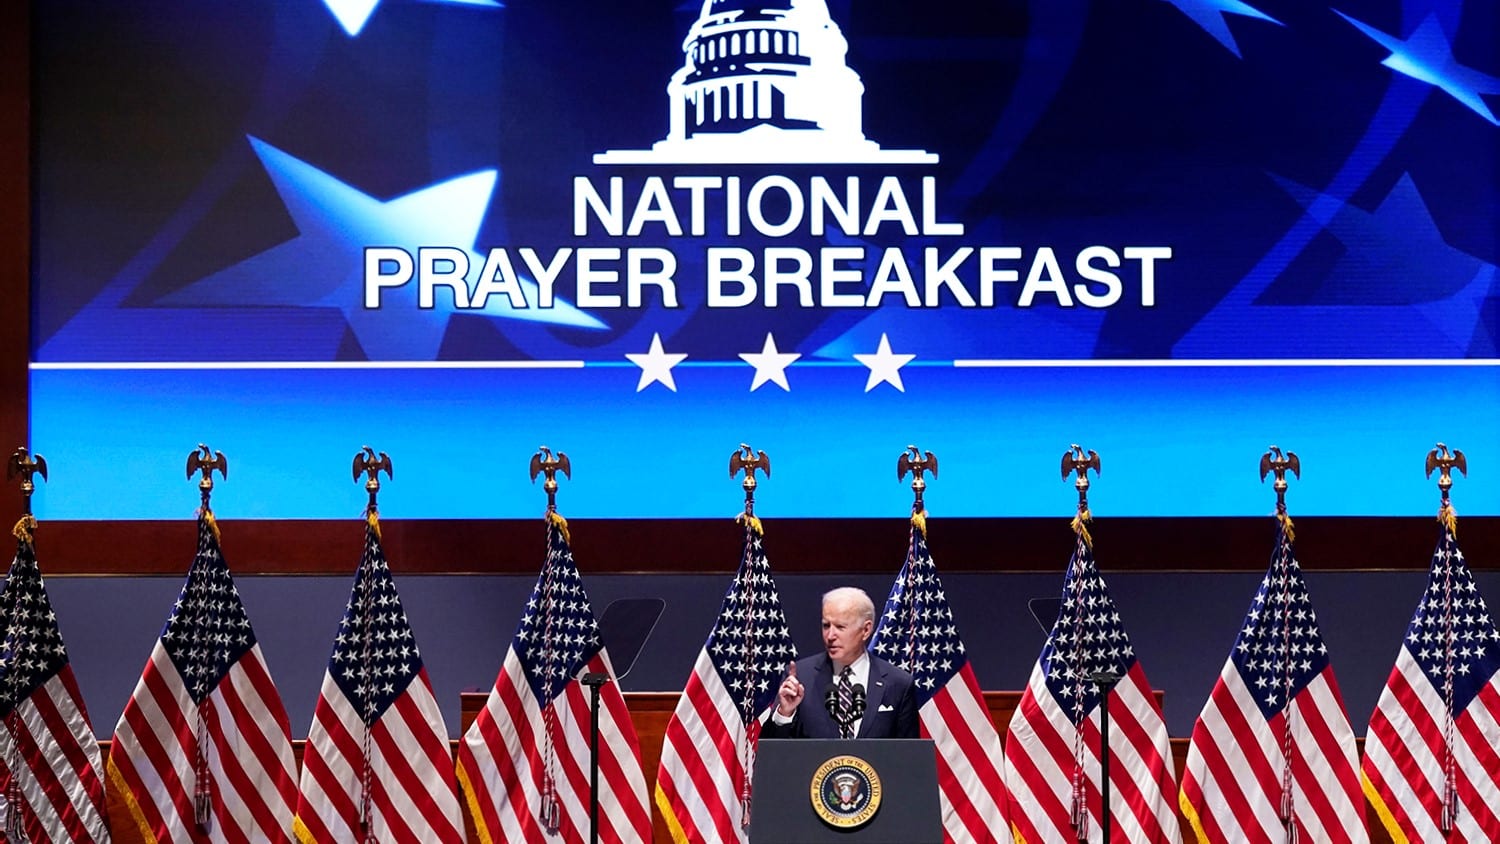 National Prayer Breakfast Breaks from ‘The Family’ with New Organization